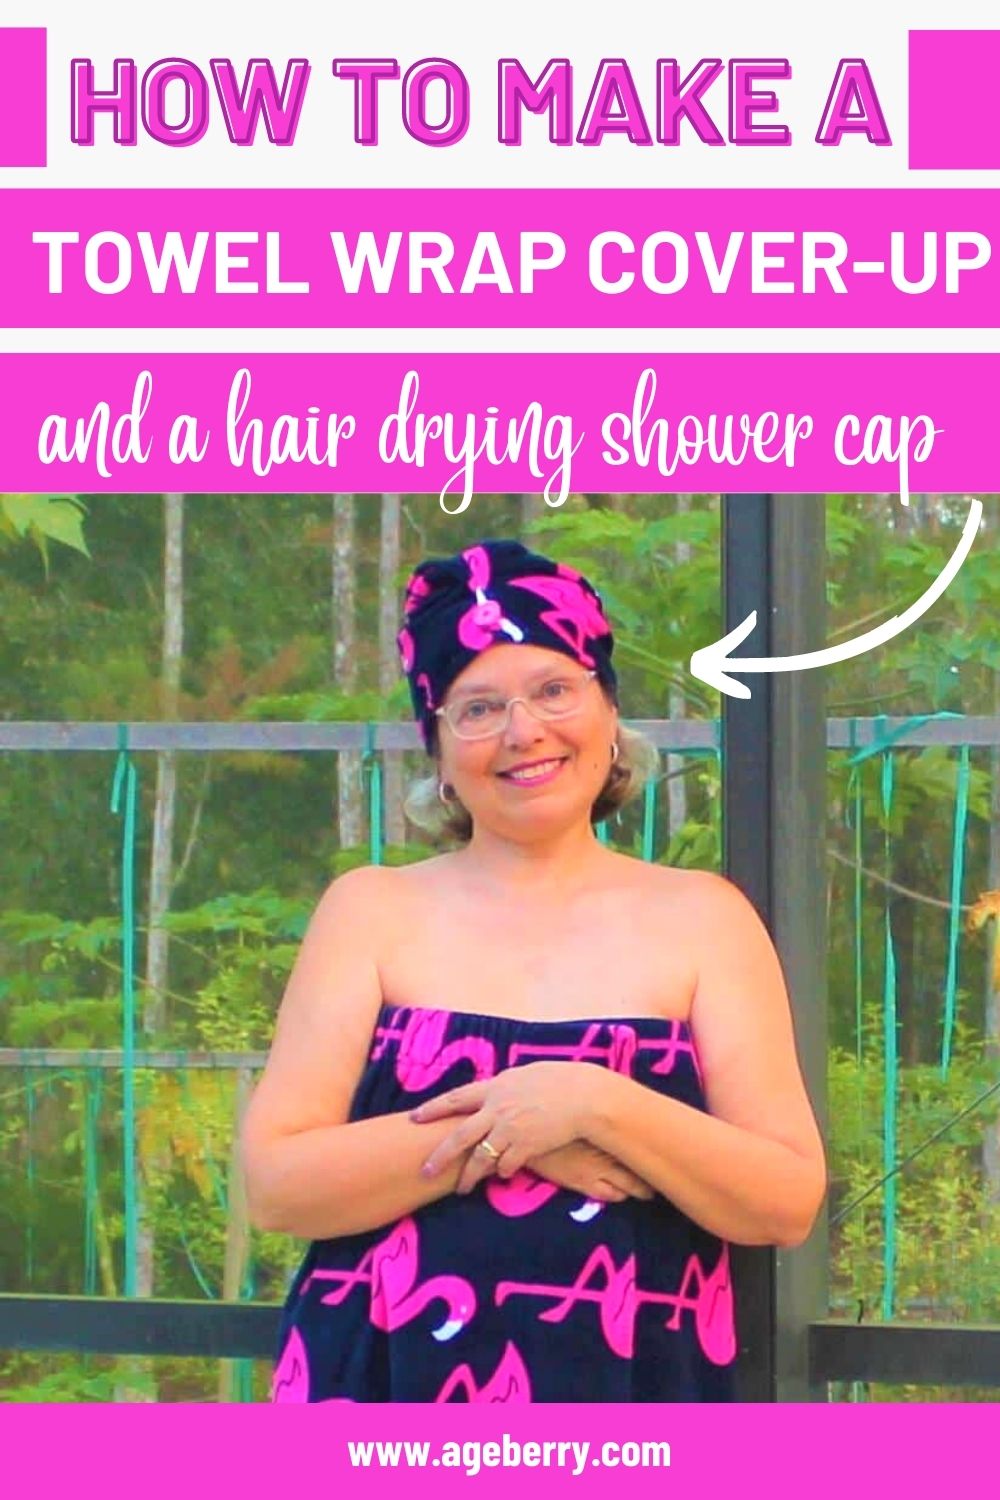 How to make a towel wrap cover-up and a hair drying shower cap from terry  towels